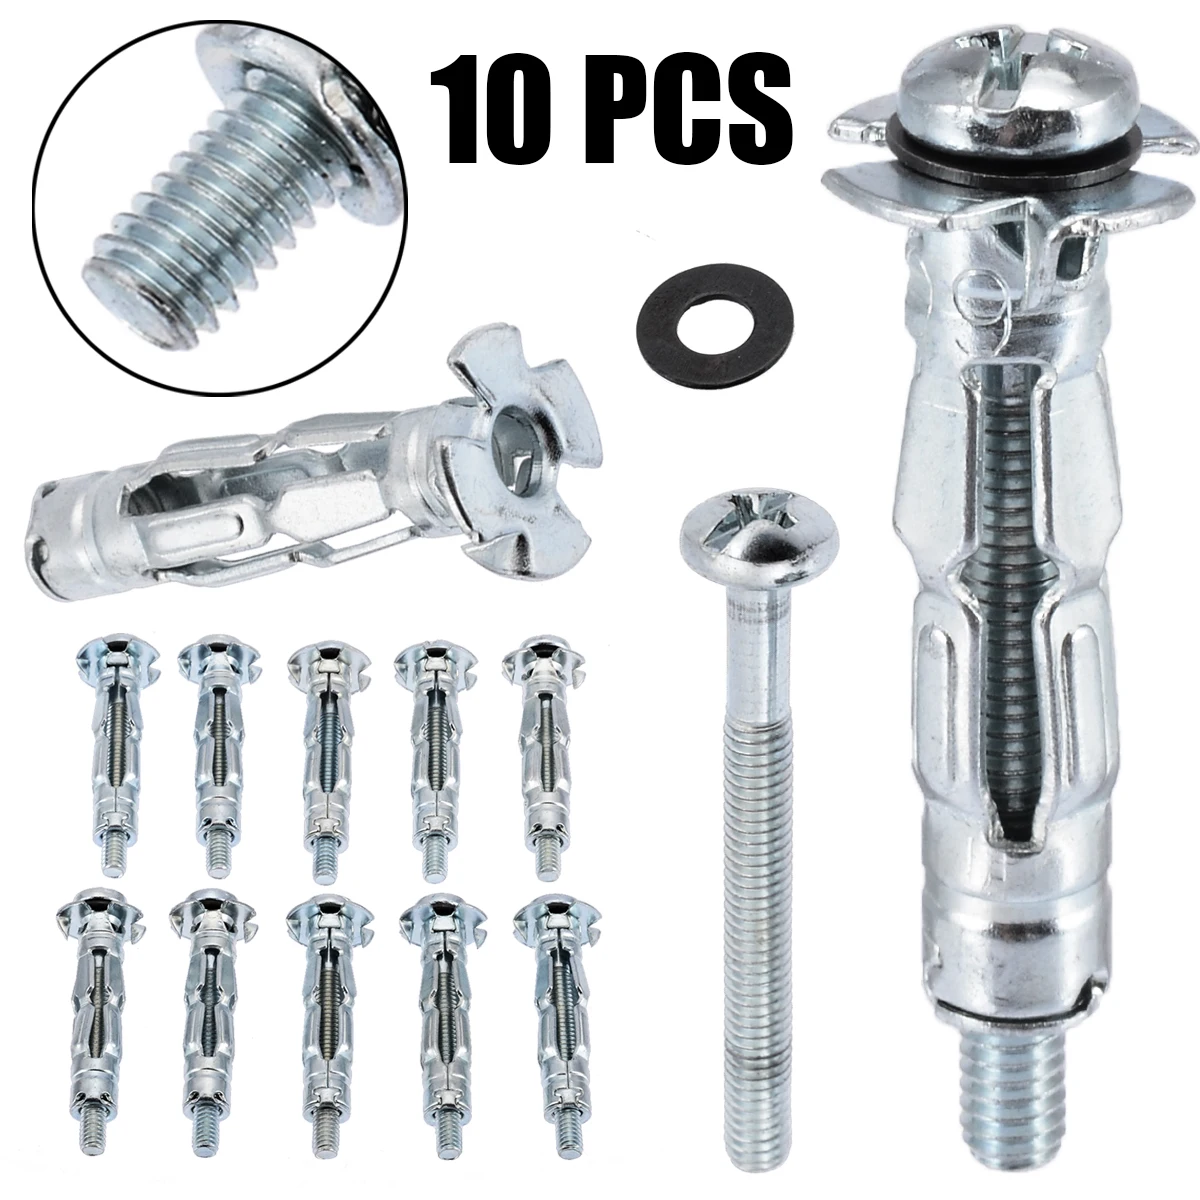 10pcs M4X32 Bolt Assortment Hollow Wall Anchors Screws for Secure Drywall Sheetrock Paneling to Walls Ceiling